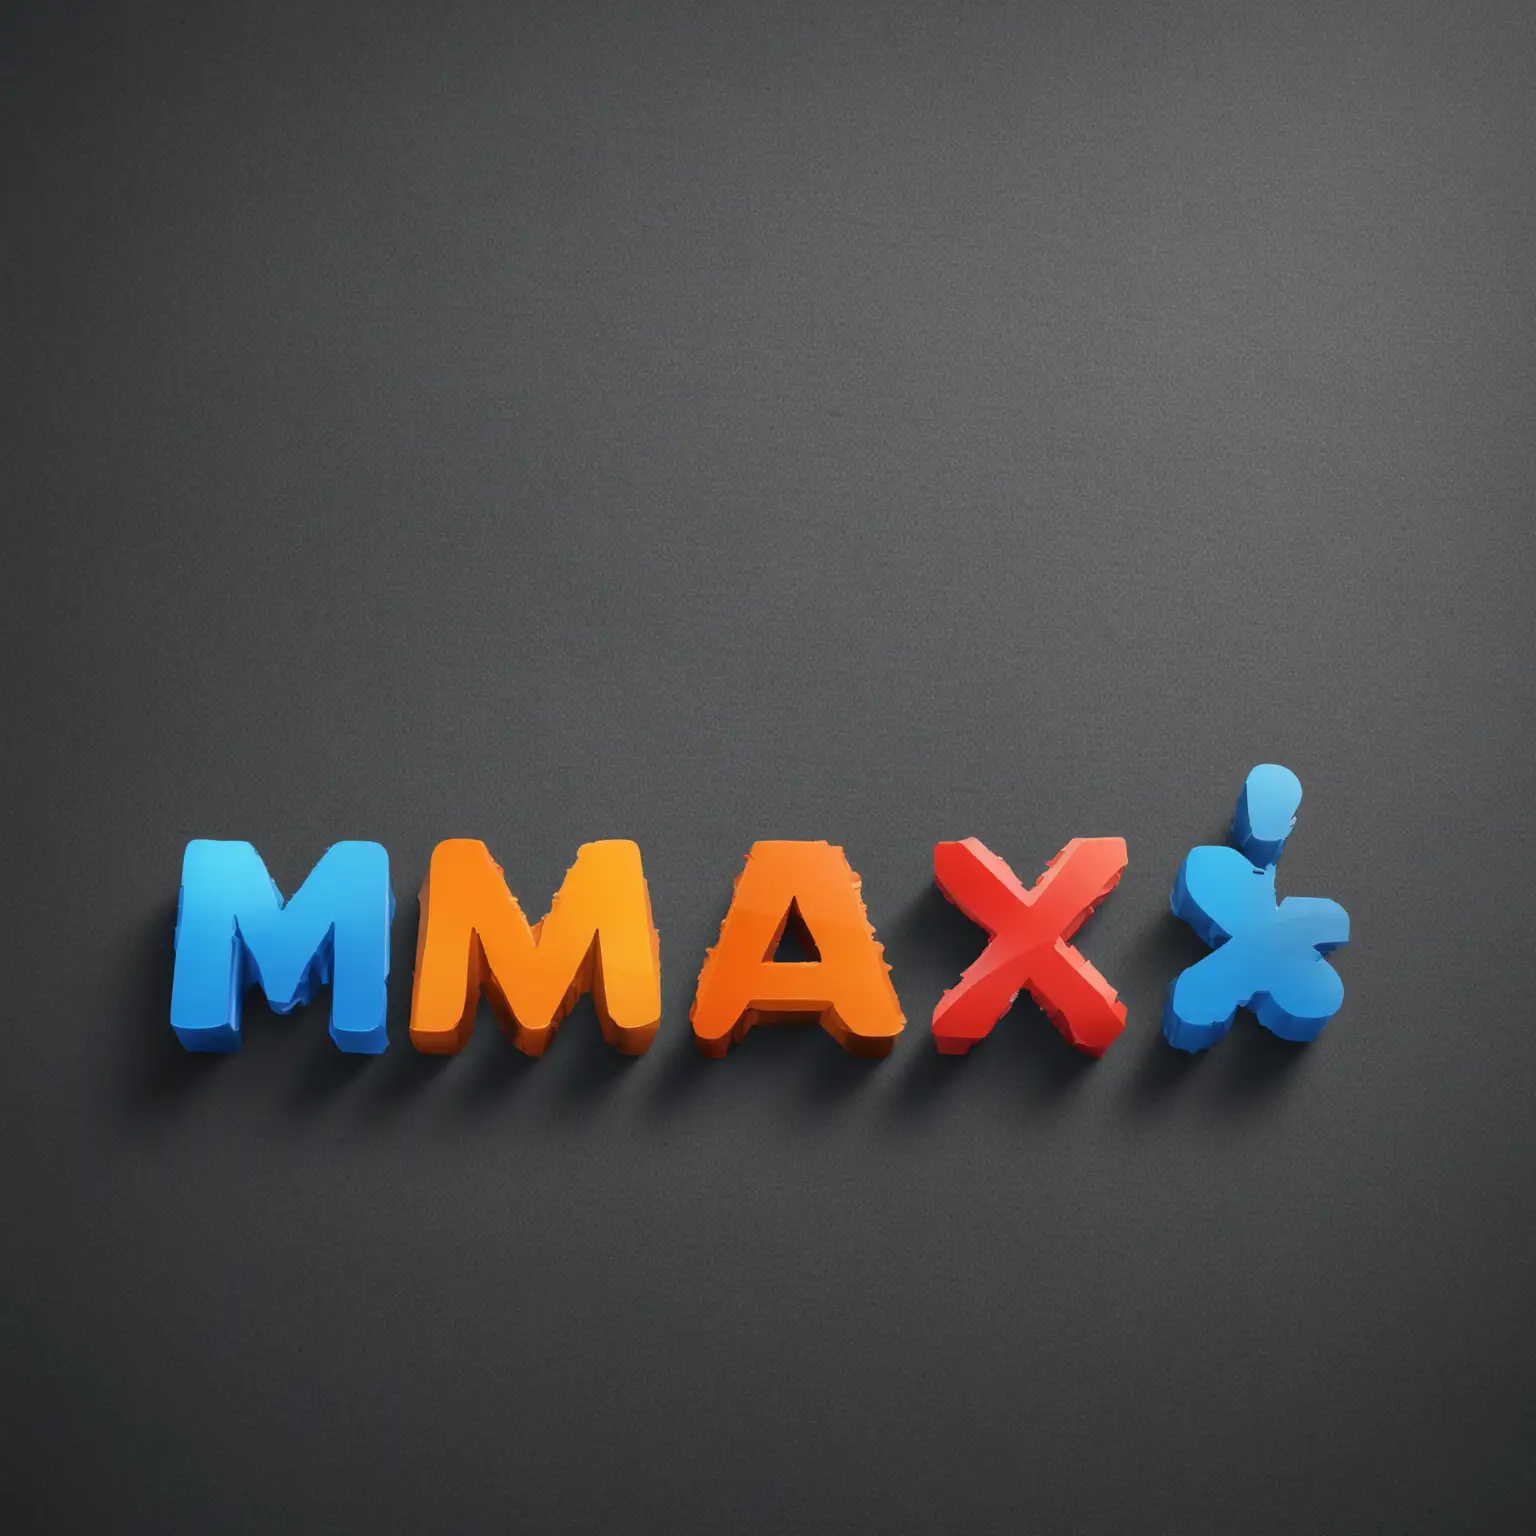 MAKX Social Media Logo in Vibrant Red Orange and Blue A TechInspired Happy and Cool Design